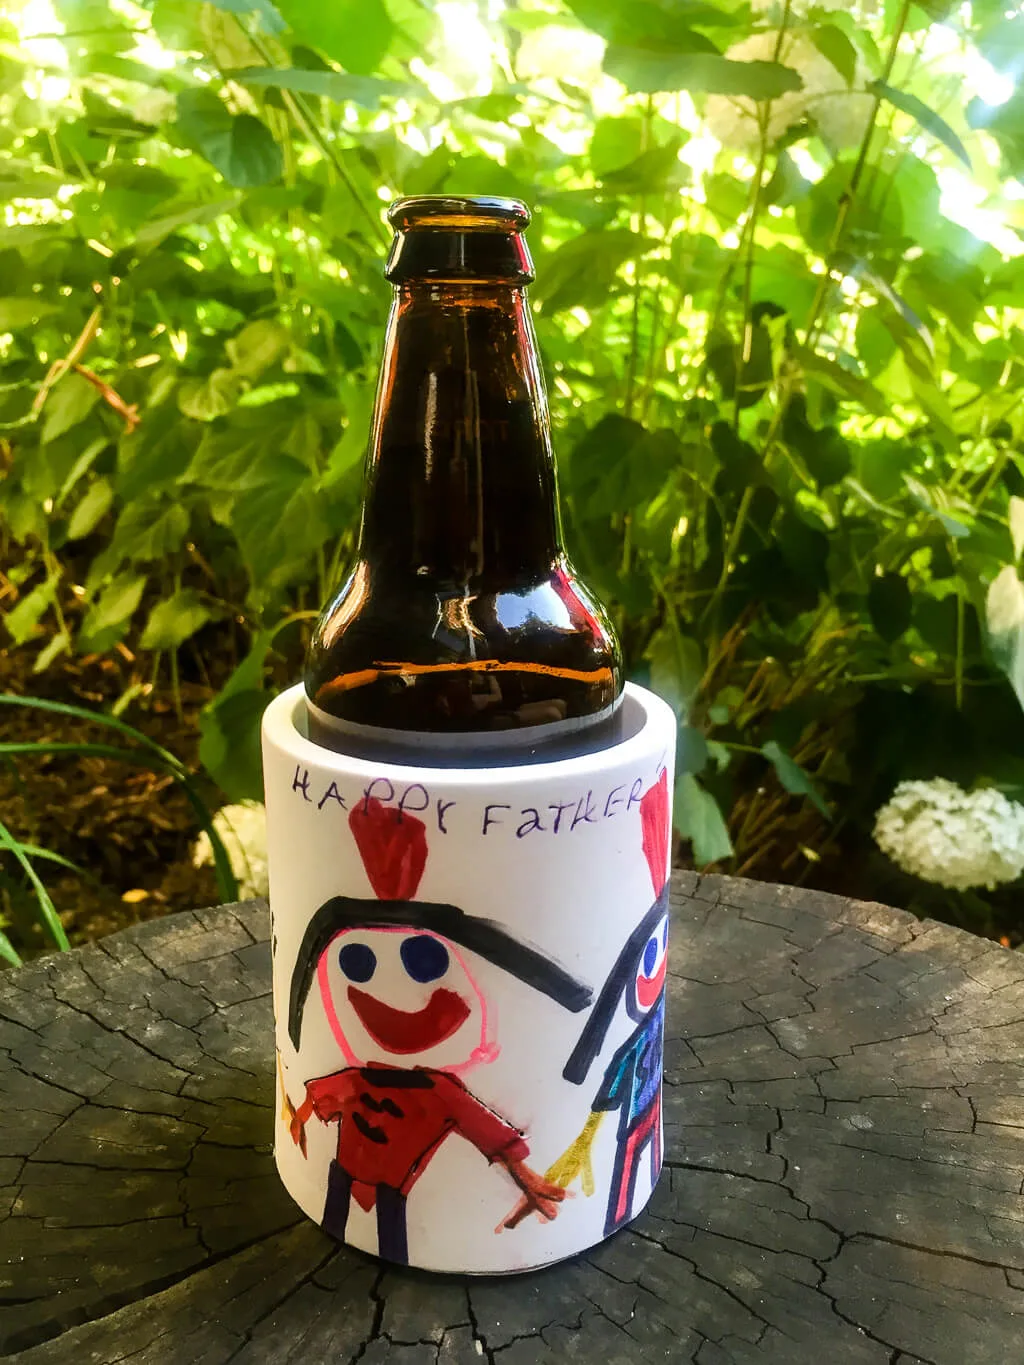 https://www.merrimentdesign.com/images/diy-drink-coozie-cool-bottles-cans-fathers-day-gift_1.jpg.webp